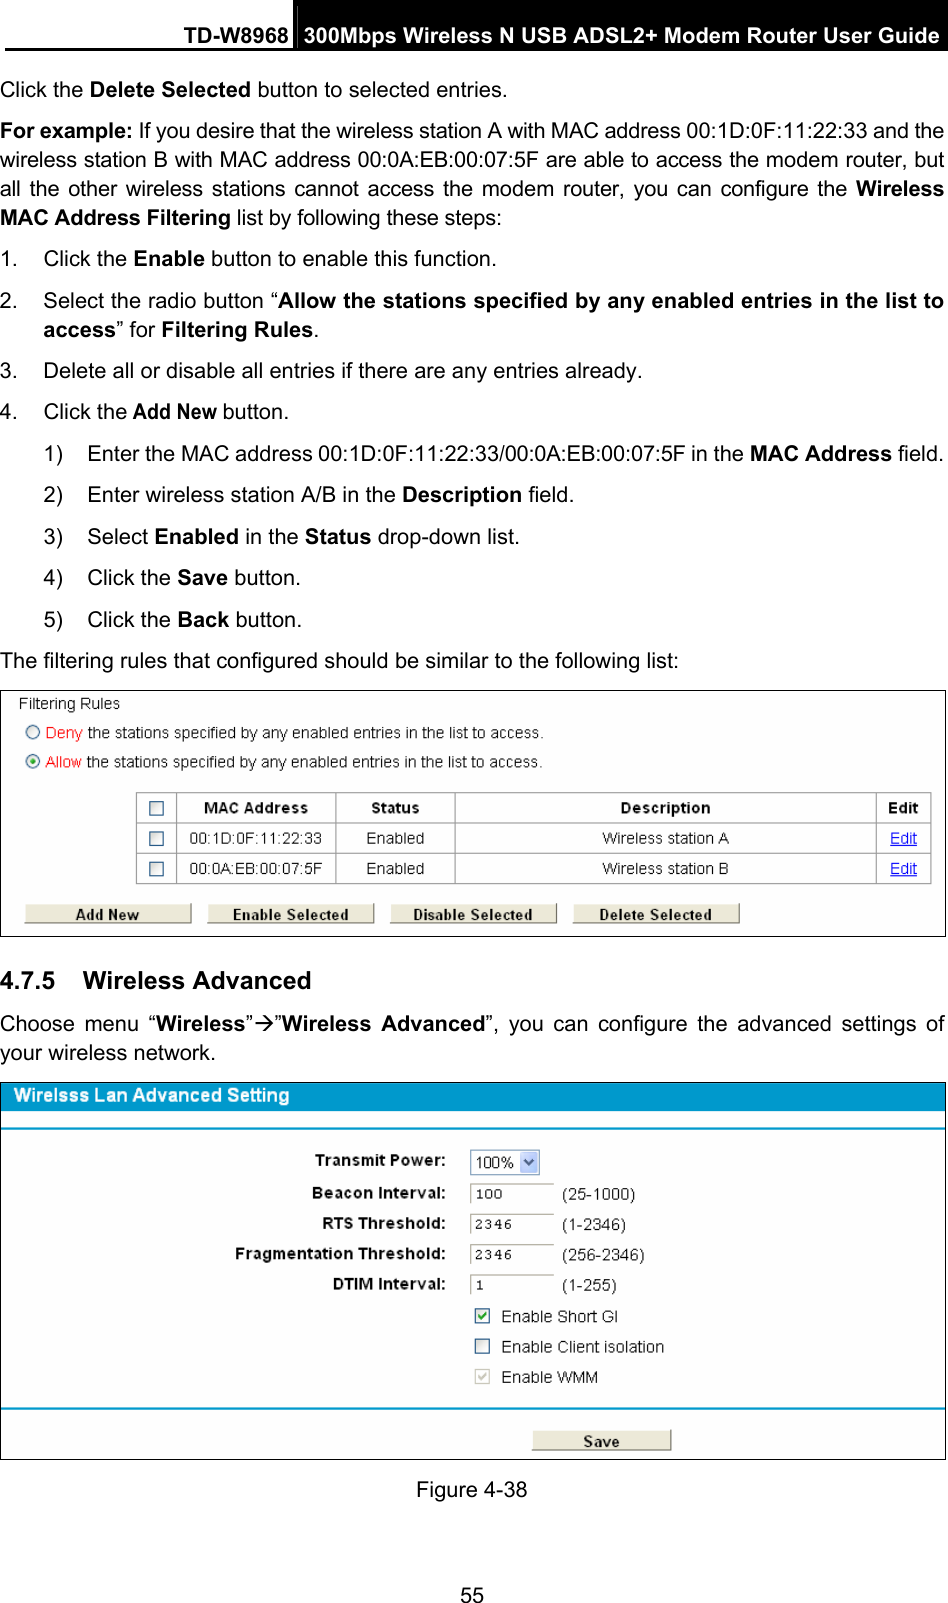 TD-W8968  300Mbps Wireless N USB ADSL2+ Modem Router User Guide 55 Click the Delete Selected button to selected entries. For example: If you desire that the wireless station A with MAC address 00:1D:0F:11:22:33 and the wireless station B with MAC address 00:0A:EB:00:07:5F are able to access the modem router, but all the other wireless stations cannot access the modem router, you can configure the Wireless MAC Address Filtering list by following these steps: 1. Click the Enable button to enable this function. 2.  Select the radio button “Allow the stations specified by any enabled entries in the list to access” for Filtering Rules. 3.  Delete all or disable all entries if there are any entries already. 4. Click the Add New button.  1)  Enter the MAC address 00:1D:0F:11:22:33/00:0A:EB:00:07:5F in the MAC Address field. 2)  Enter wireless station A/B in the Description field. 3) Select Enabled in the Status drop-down list. 4) Click the Save button. 5) Click the Back button. The filtering rules that configured should be similar to the following list:  4.7.5  Wireless Advanced Choose menu “Wireless”Æ”Wireless Advanced”, you can configure the advanced settings of your wireless network.  Figure 4-38 